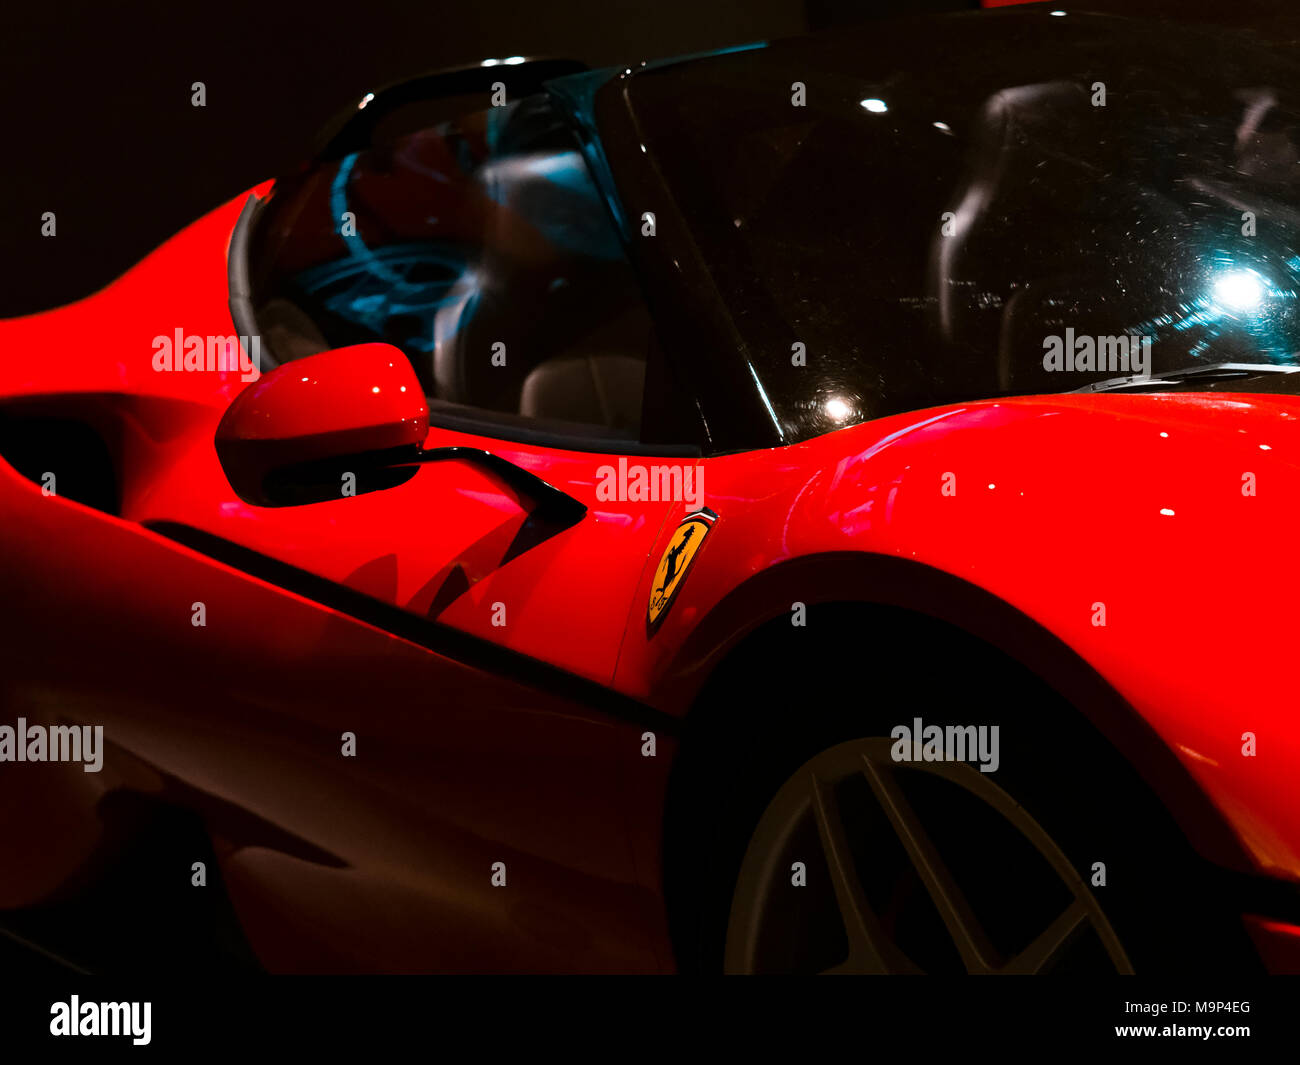 Detail of a Ferrari J50 Clay Model from 2015, Ferrari is an Italian Sports Car manufacturer founded in Italy 1947. Stock Photo